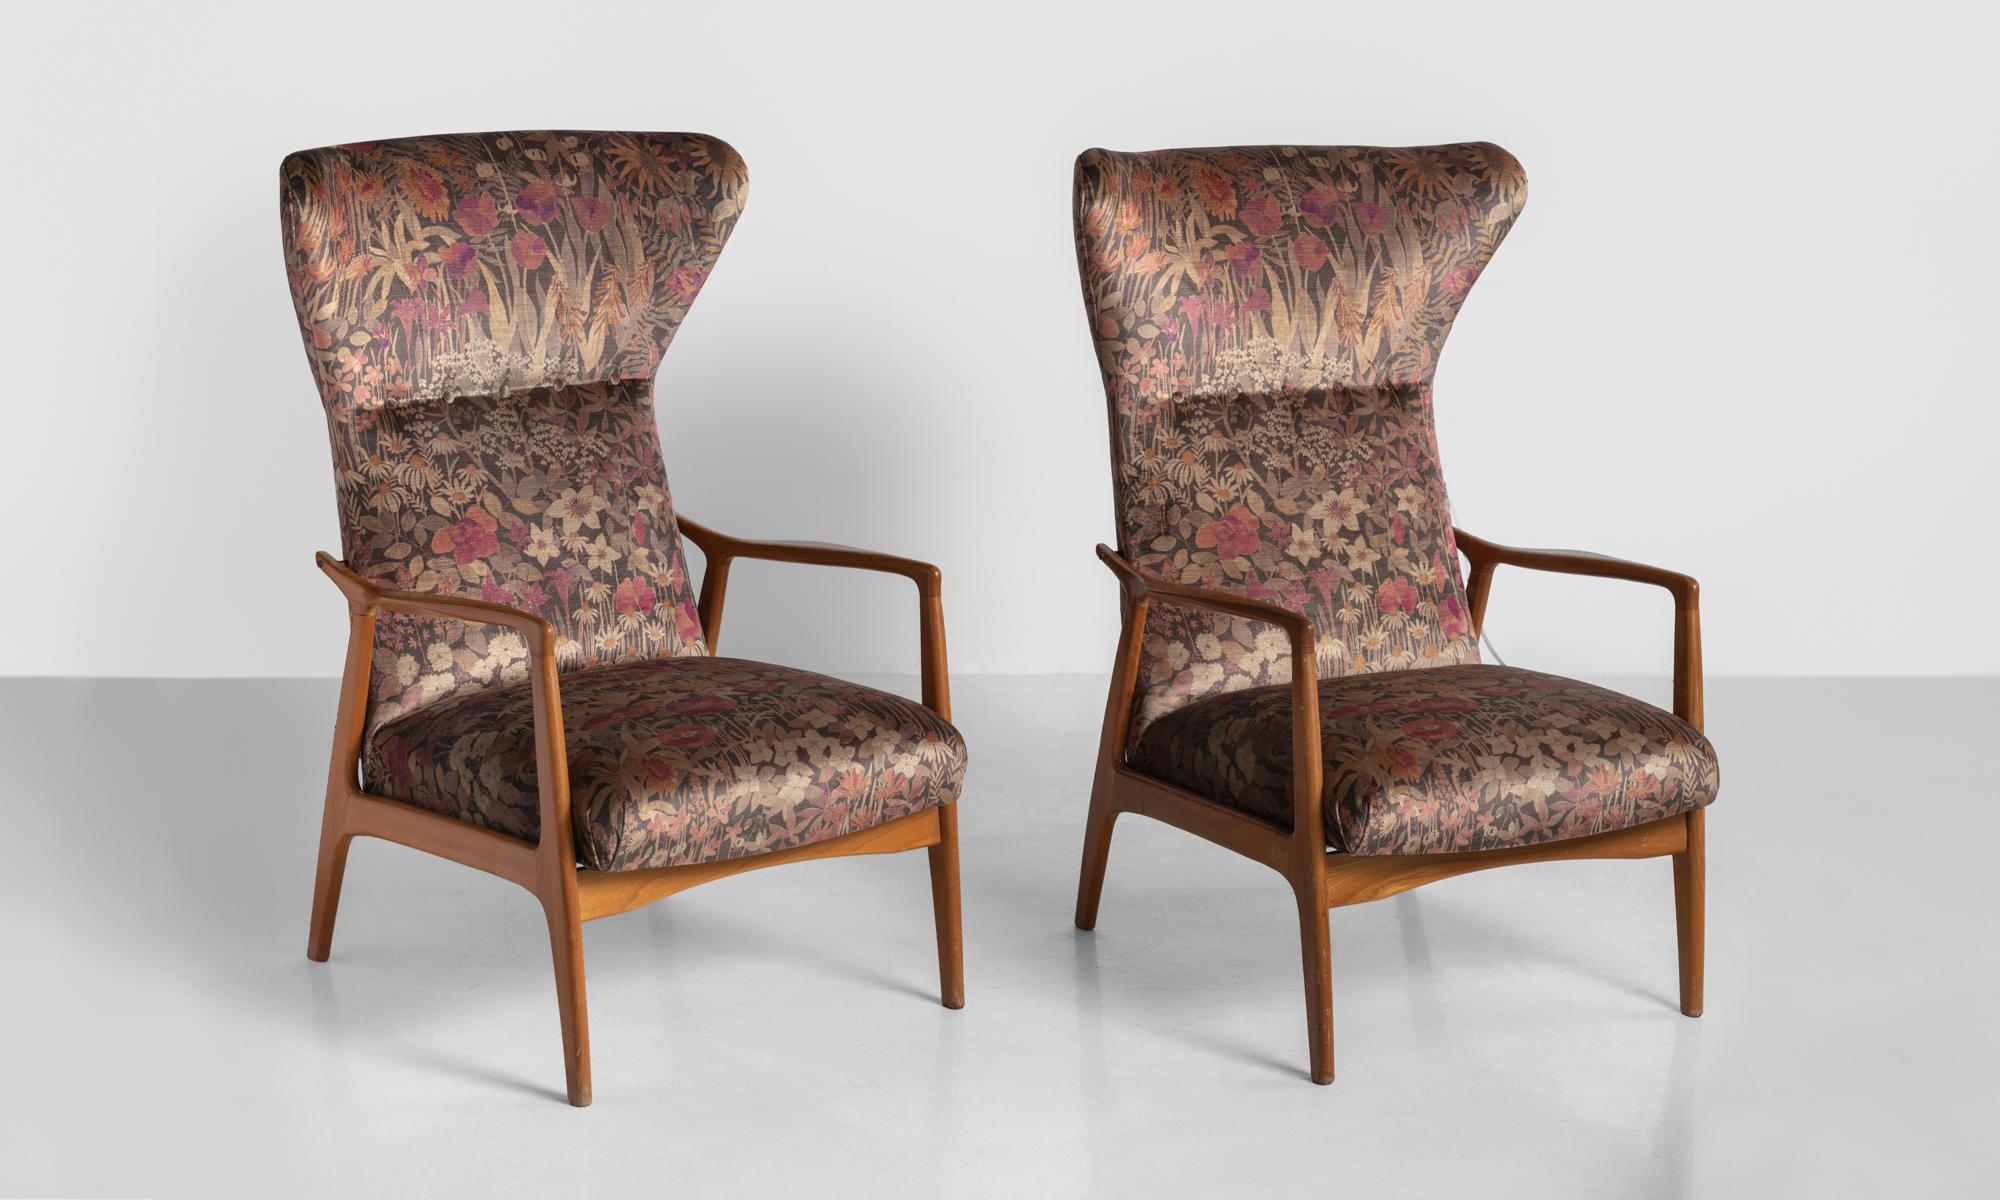 Modern wingback armchairs, France, circa 1950.

Tall forms, newly upholstered in Liberty of London velvet.